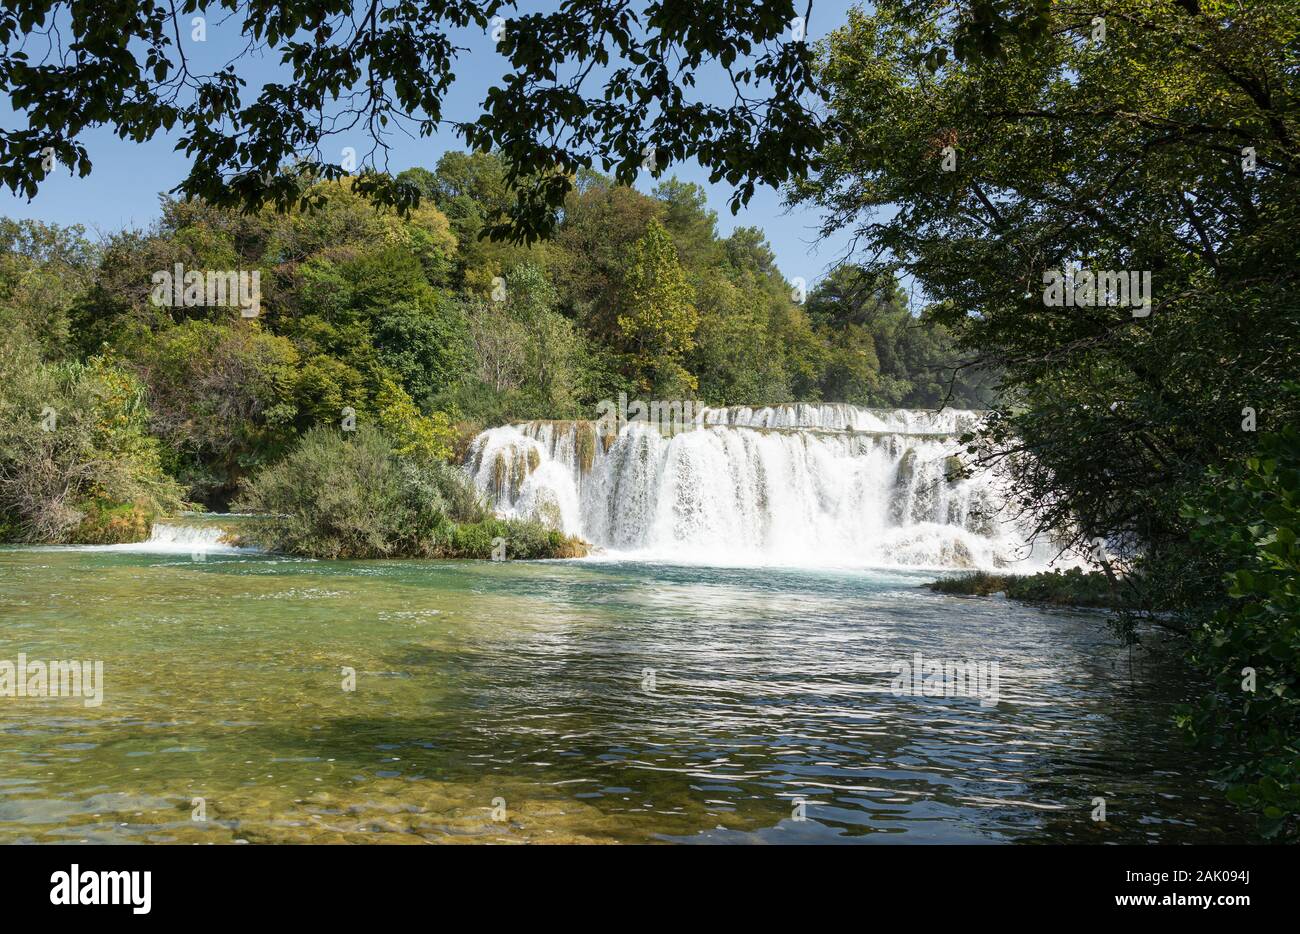 Krka National Park one of the most famous and the most beautiful park in Croatia. Travel destination Stock Photo